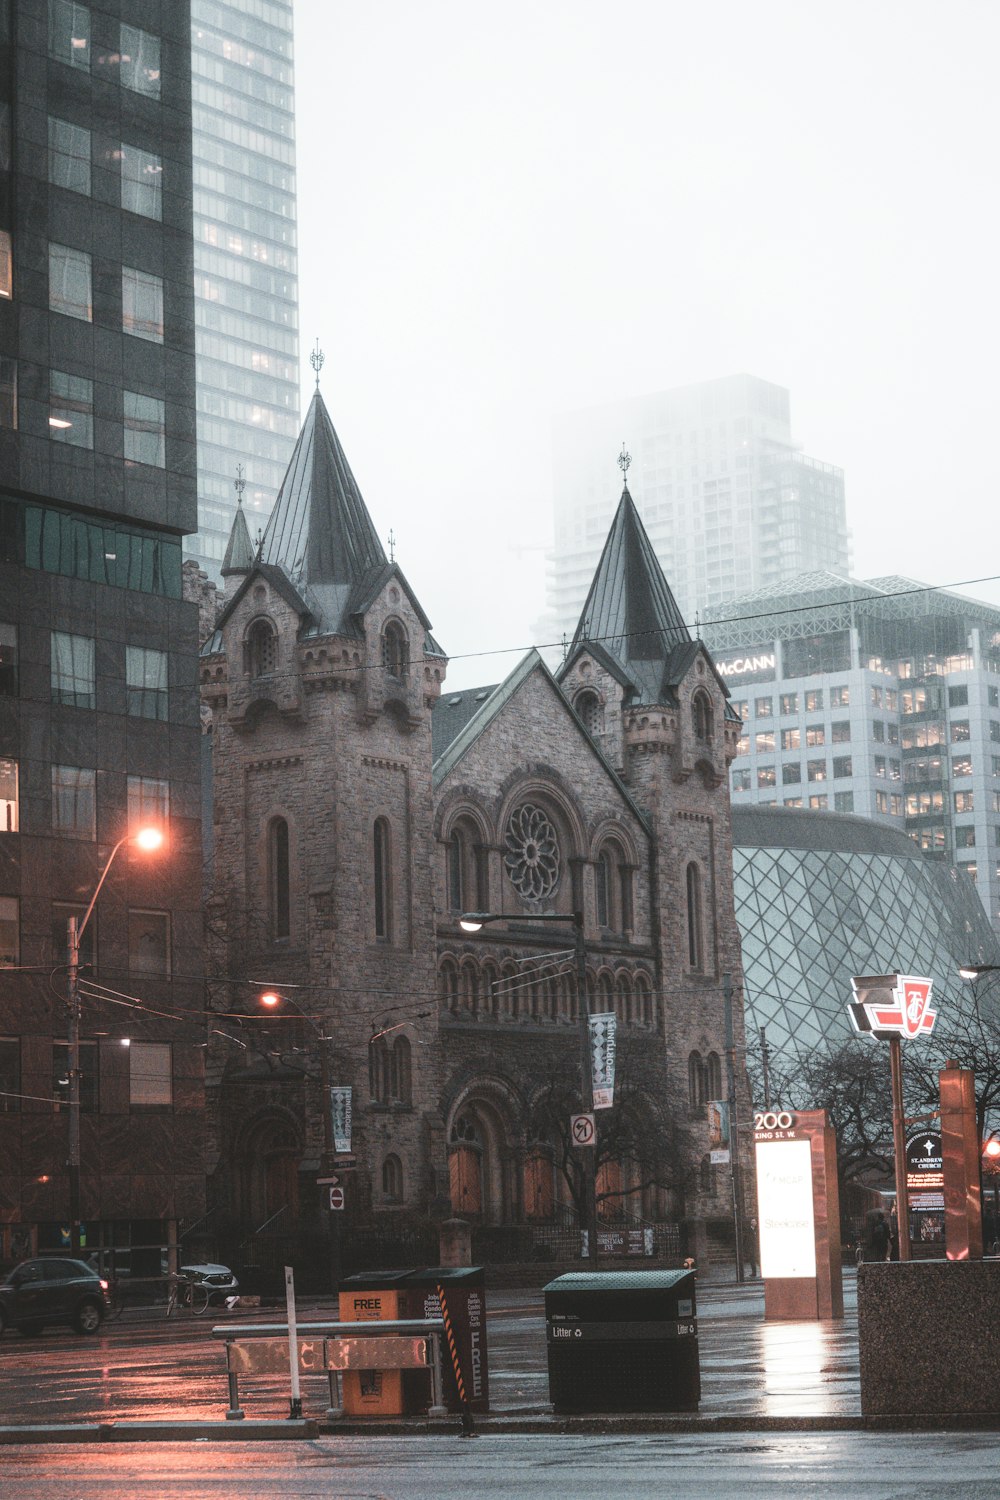 an old church in the middle of a city